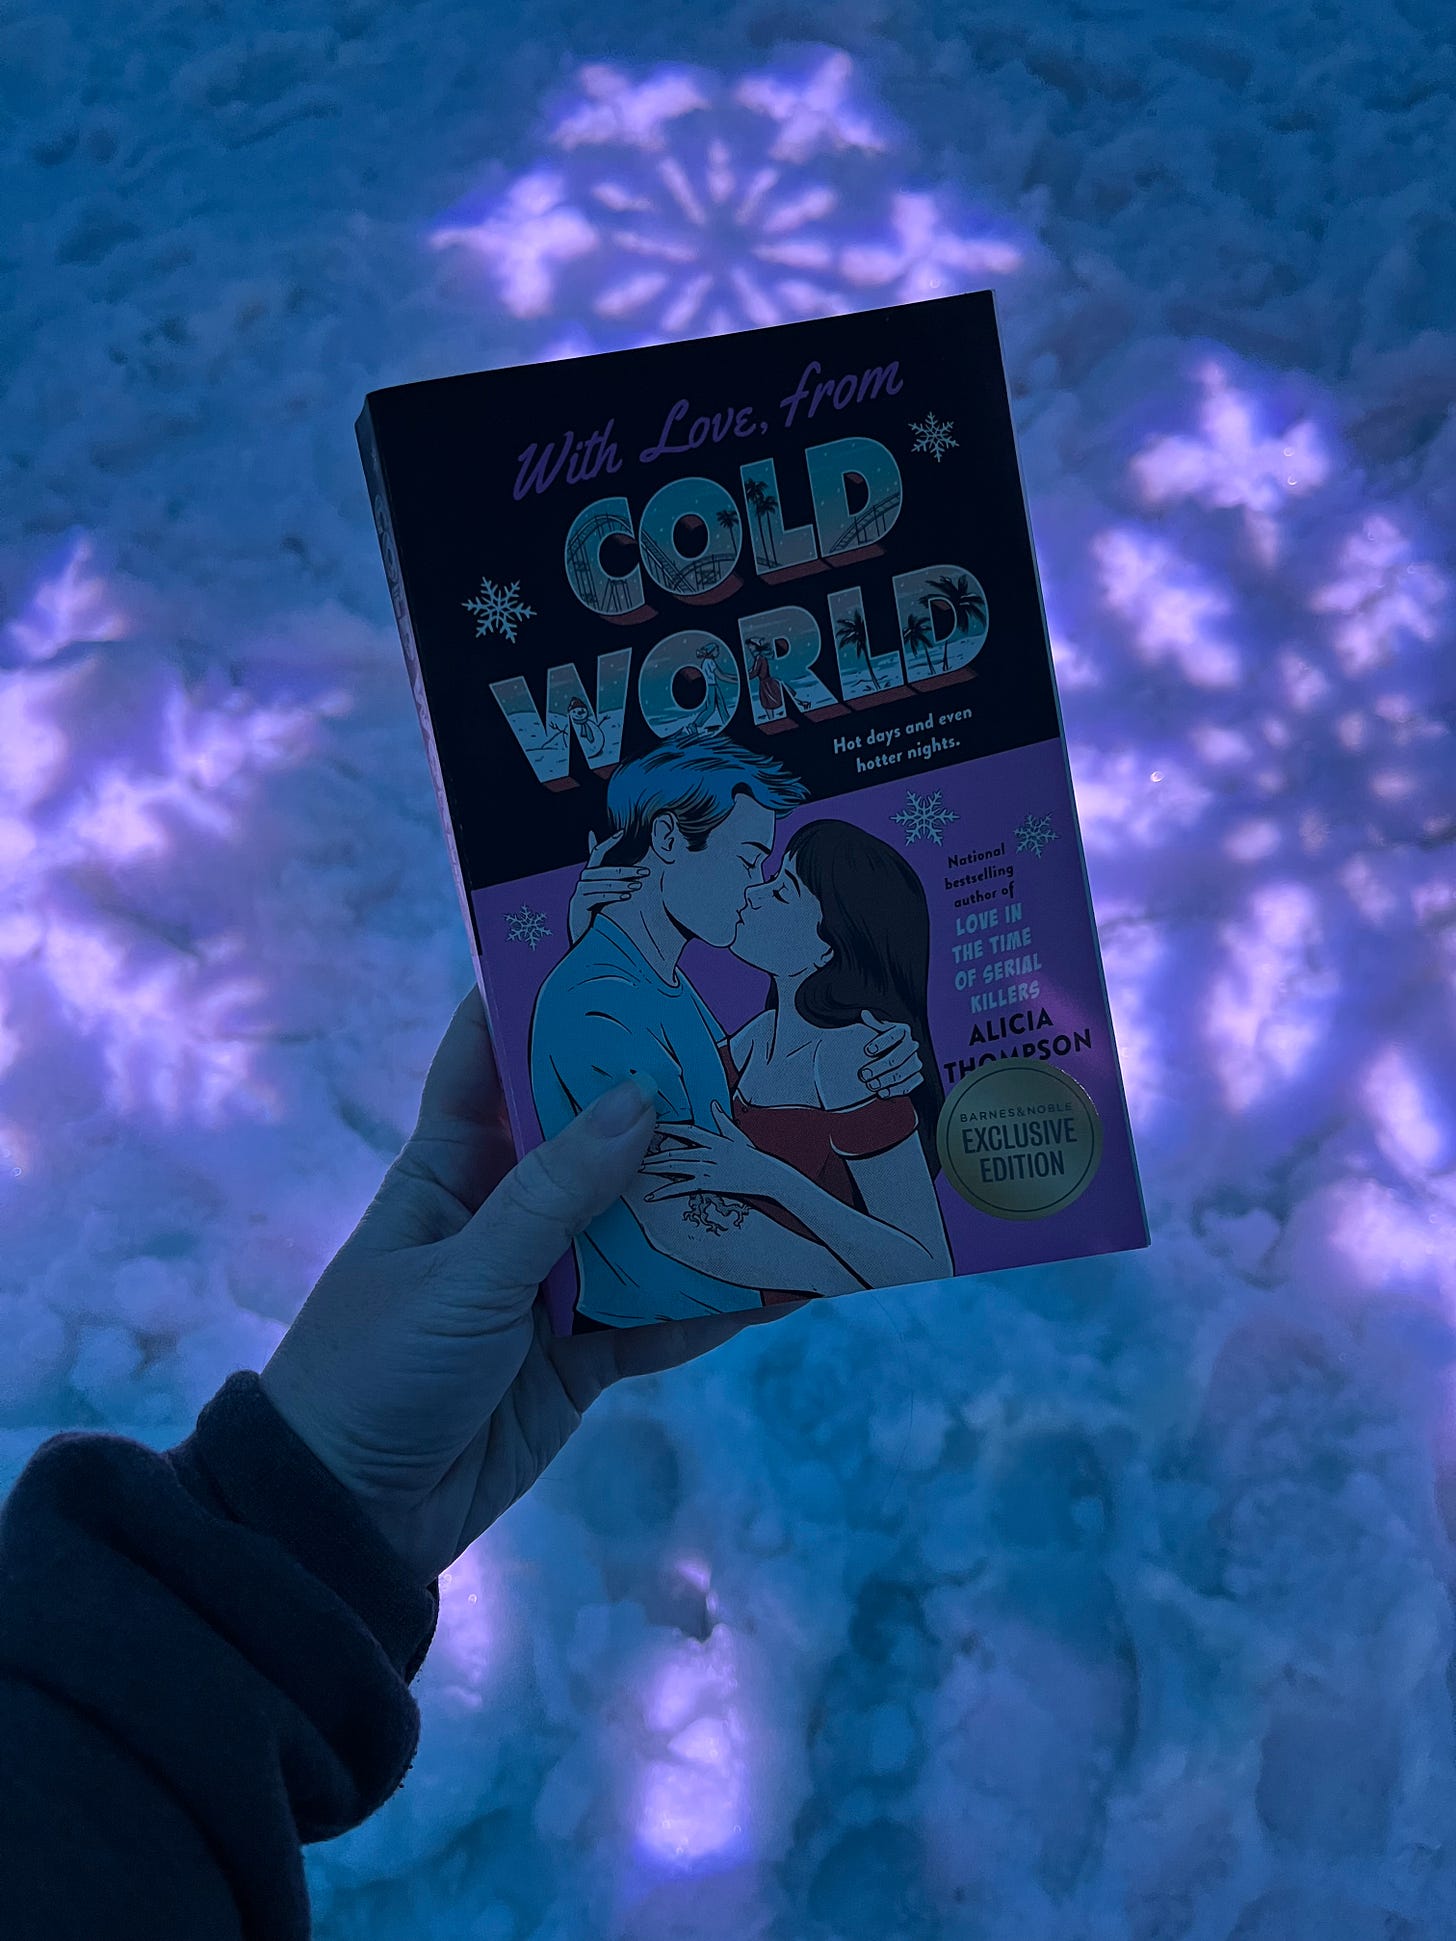 Picture of my hand holding up the pink cover copy of WITH LOVE, FROM COLD WORLD in front of the snow in the Igloo, which is lit by purple lights and has images of snowflakes projected on it